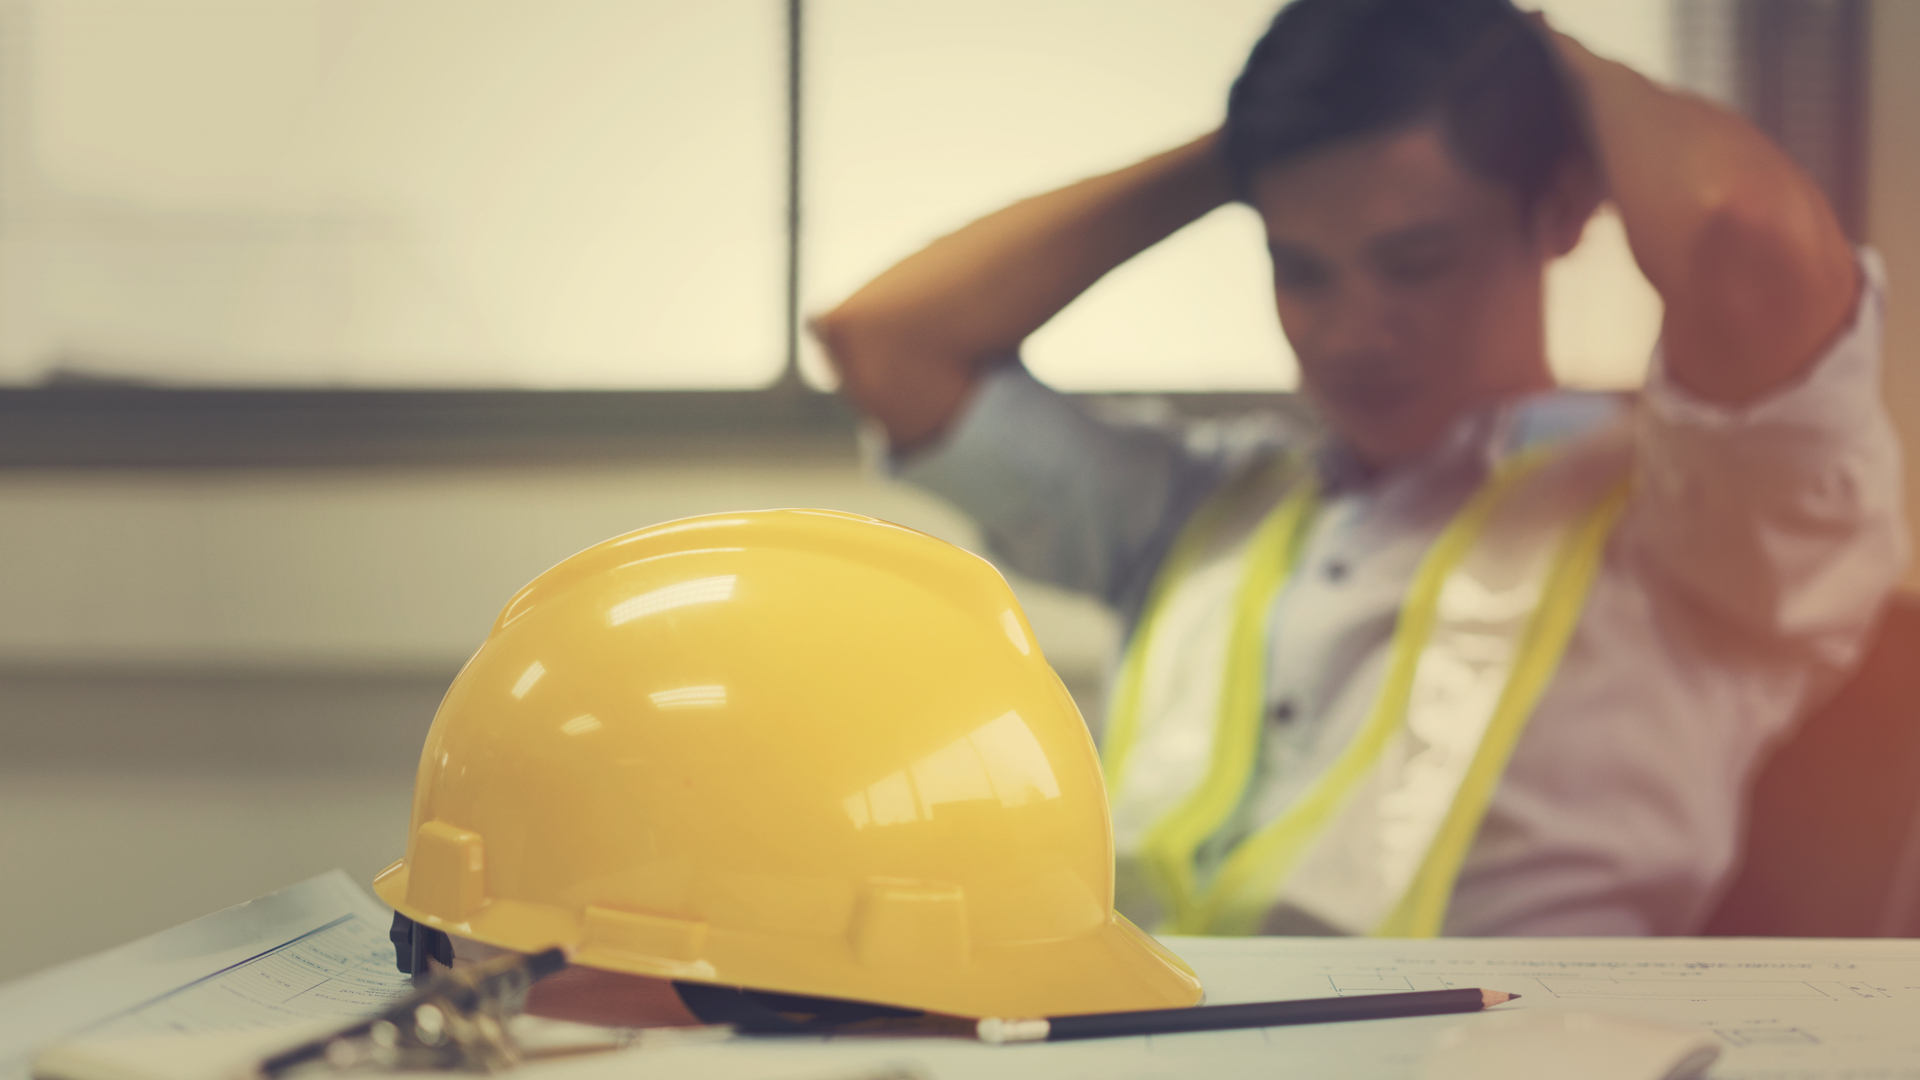 A worker sitting down with his hands behind his head. In front of him is a hard hat.